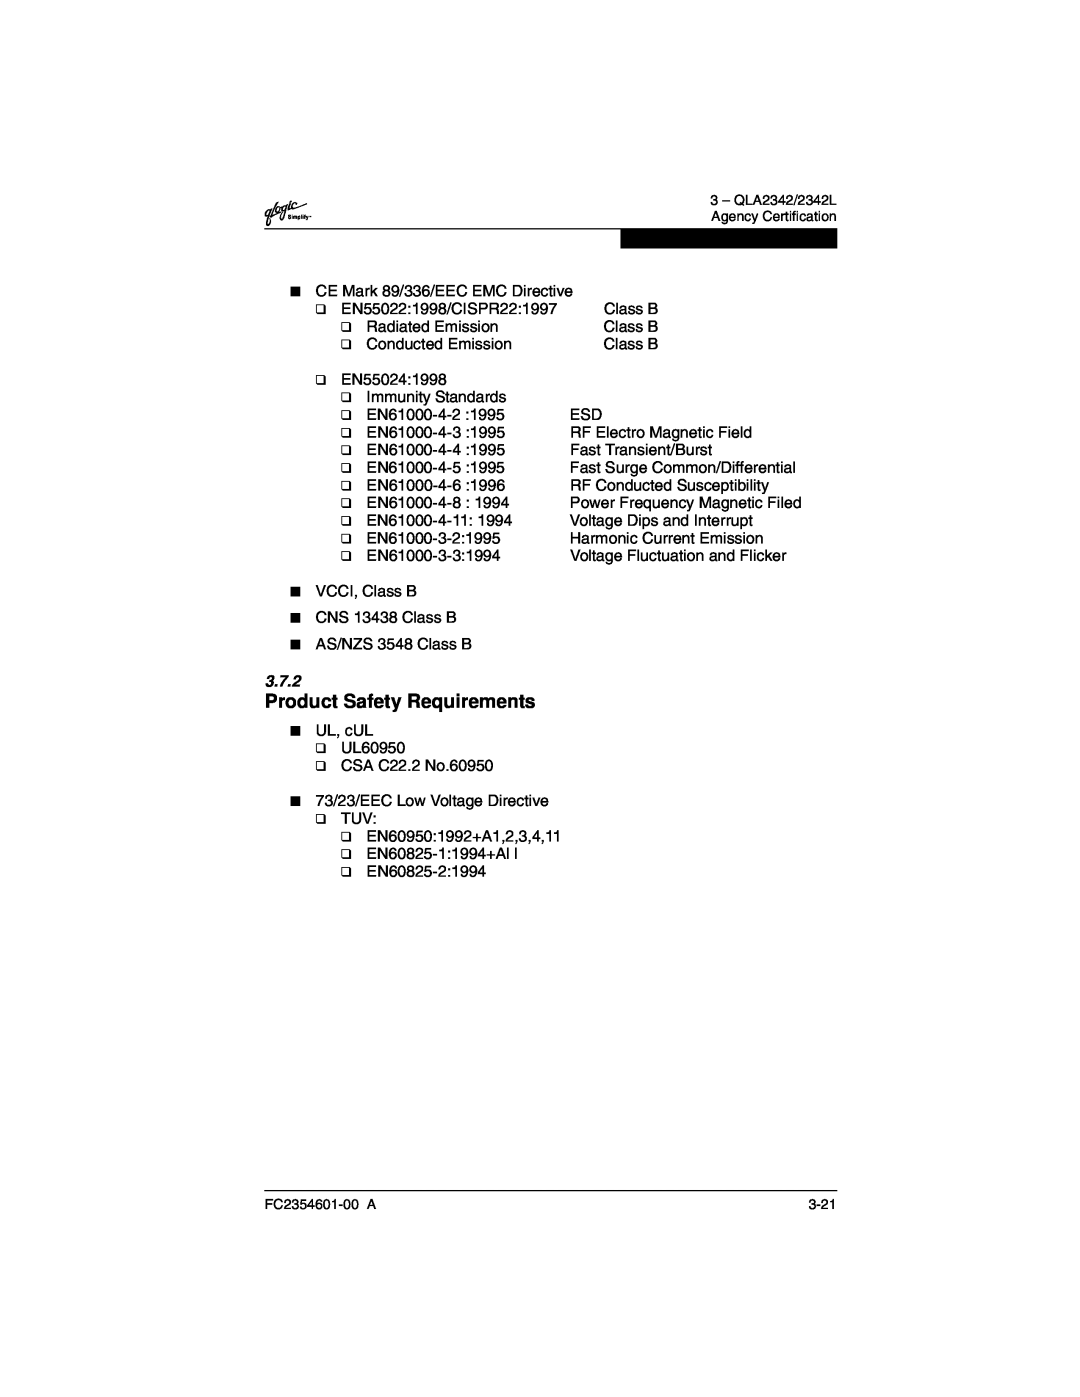 Q-Logic 2300 manual 3.7.2, Product Safety Requirements 